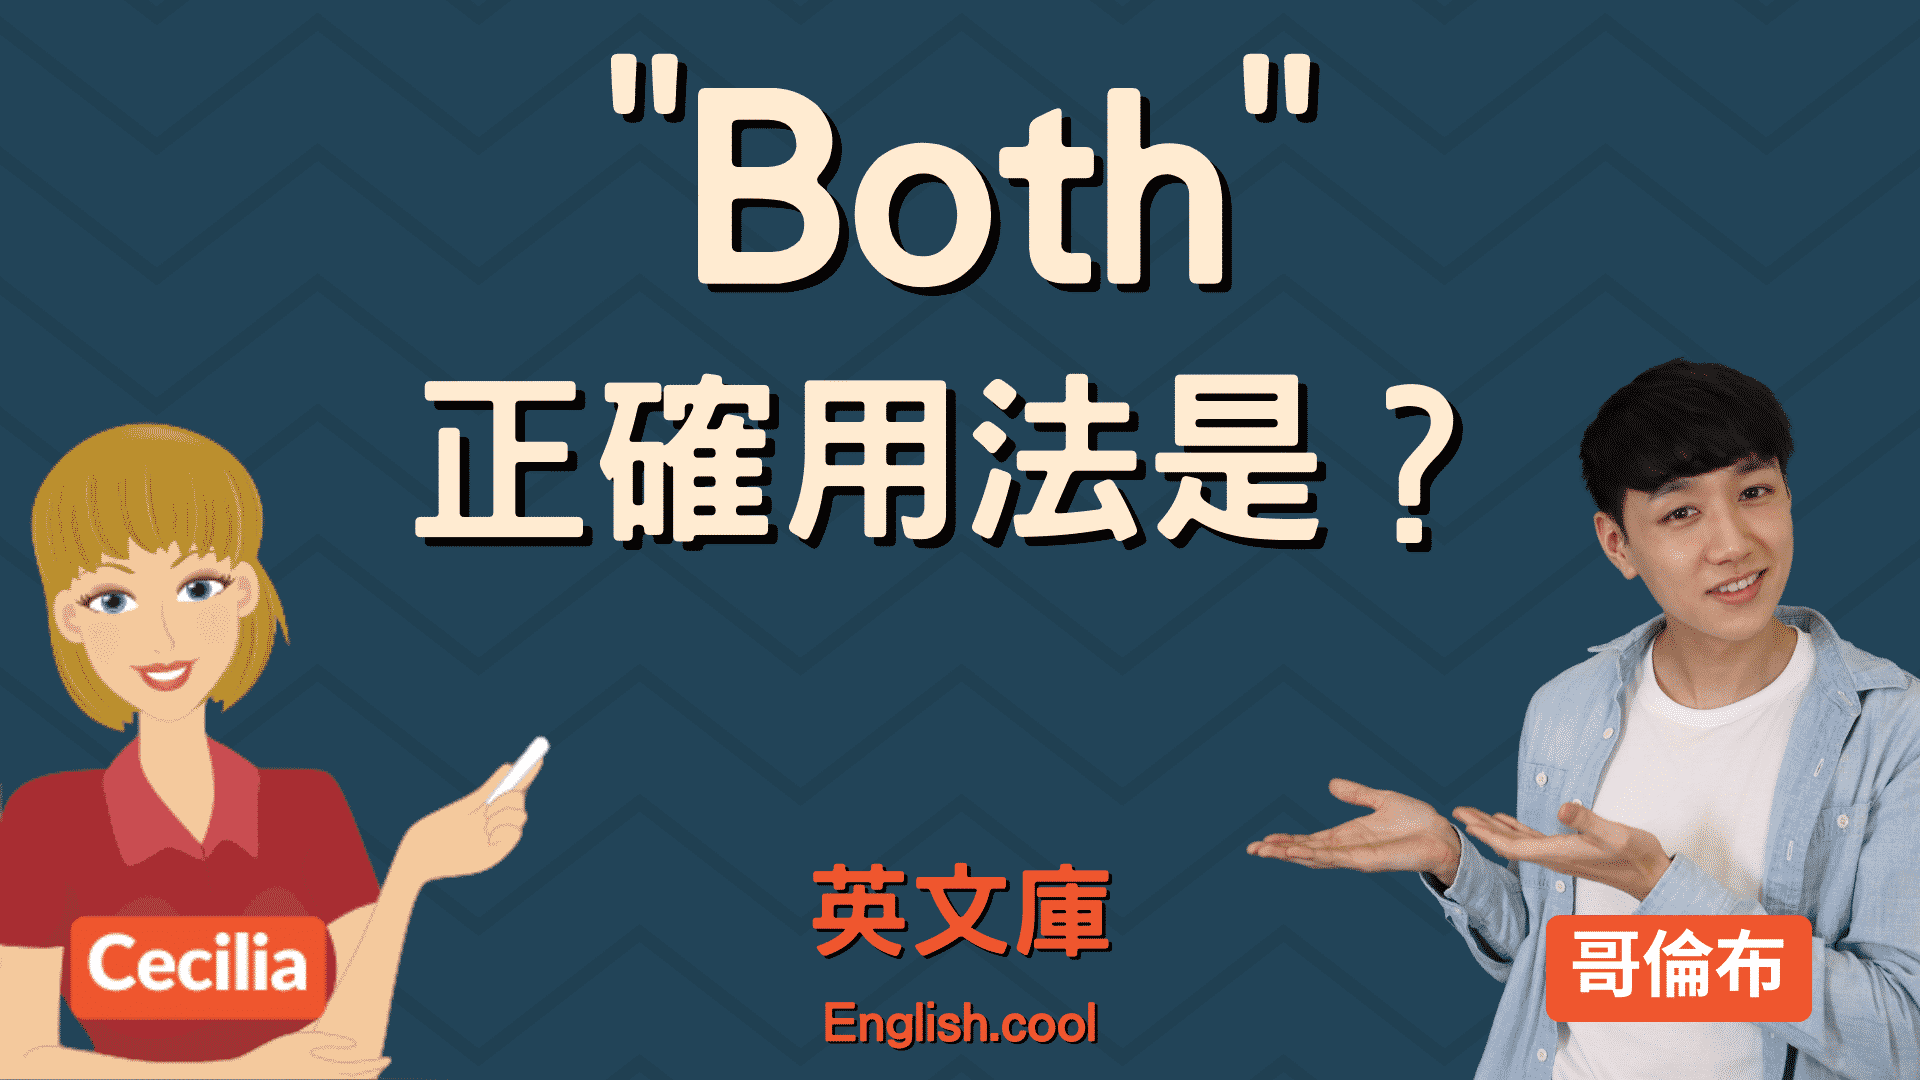 You are currently viewing 「both」正確用法是？來看例句搞懂！